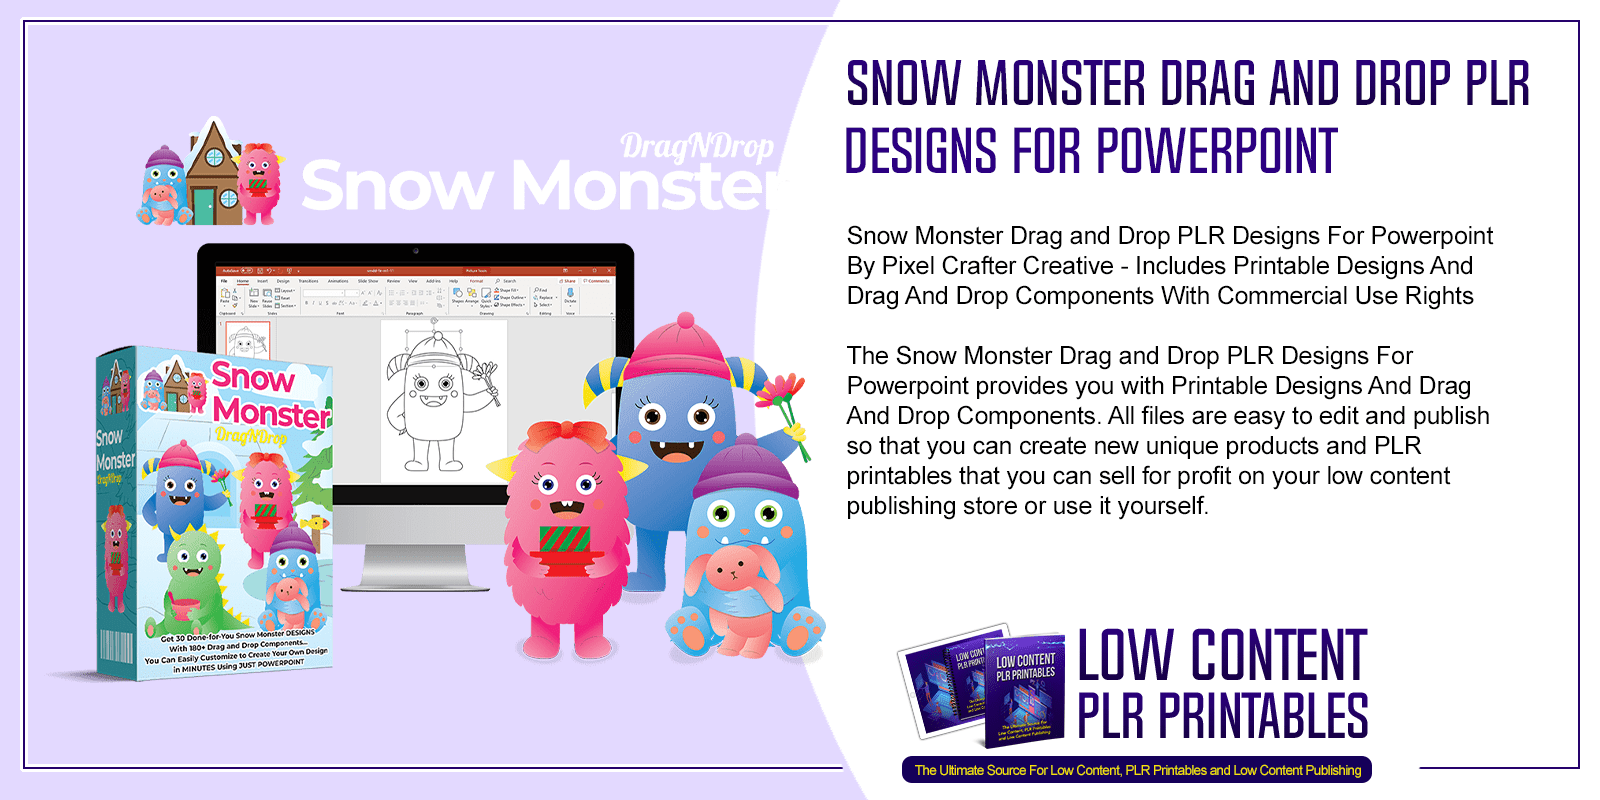 Snow Monster Drag and Drop PLR Designs For Powerpoint